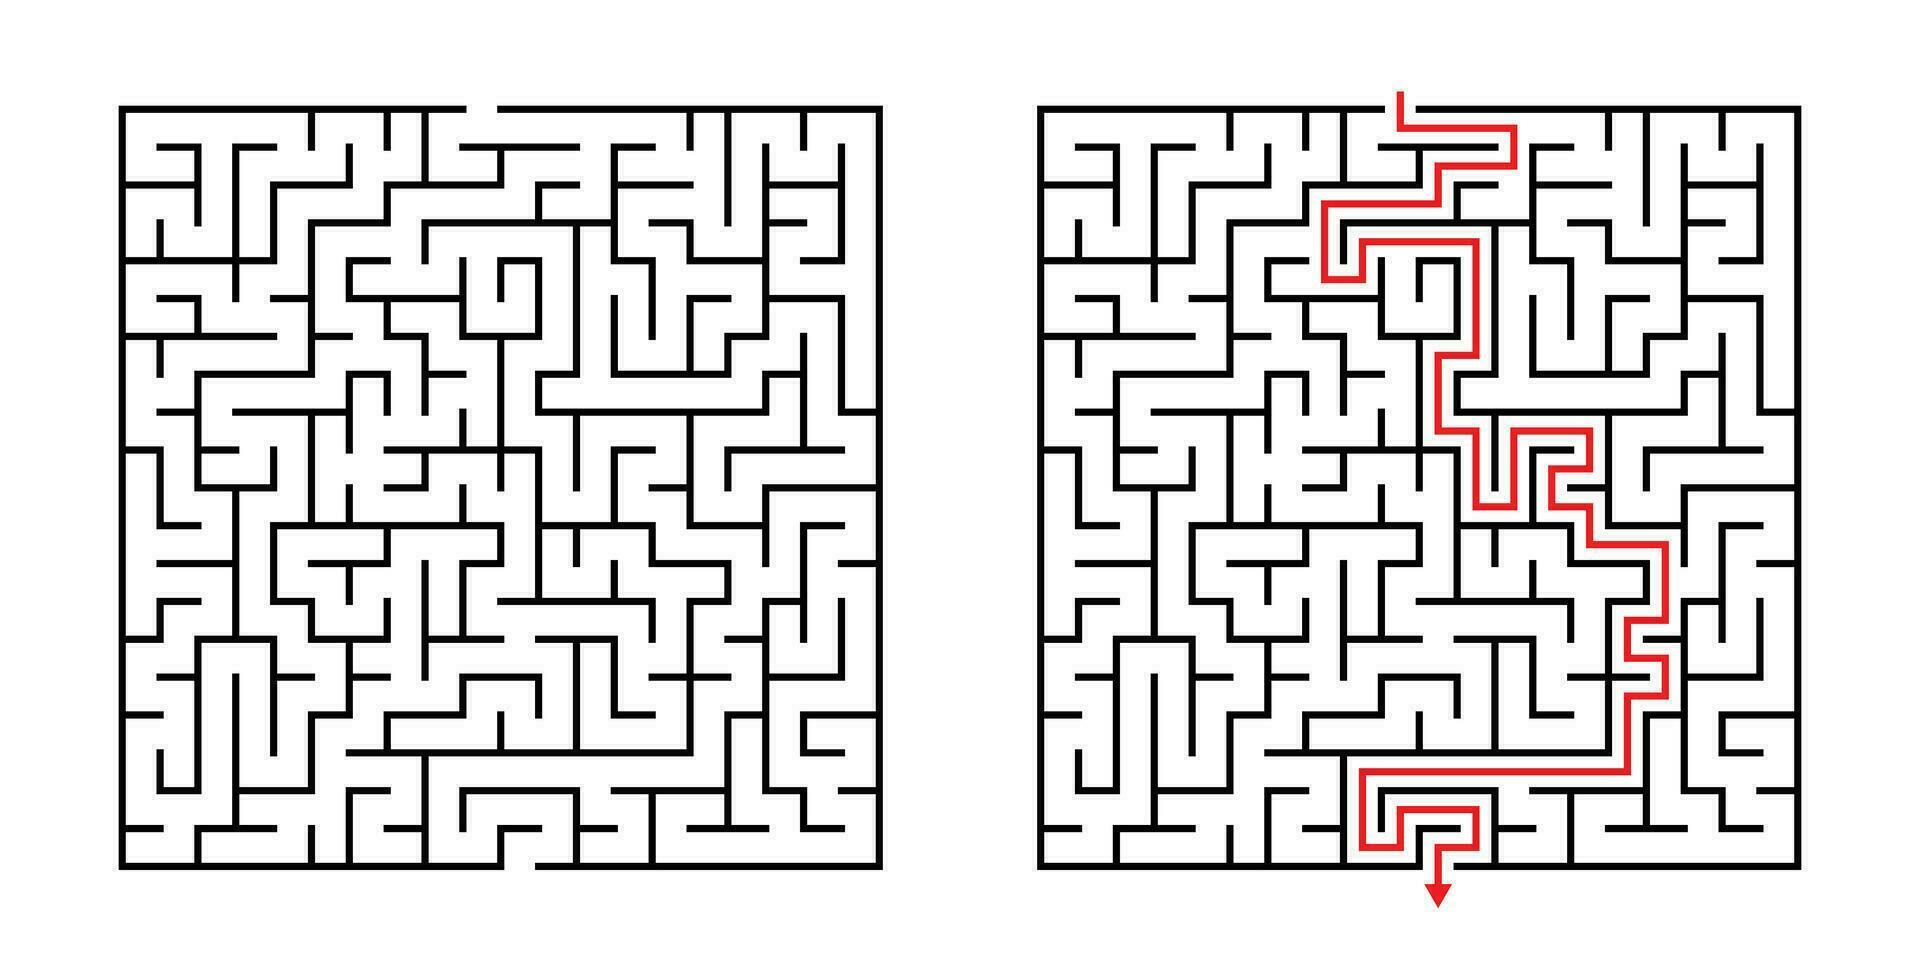 Vector Square Maze - Labyrinth with Included Solution in Black Red. Funny Educational Mind Game for Coordination, Problems Solving, Decision Making Skills Test.